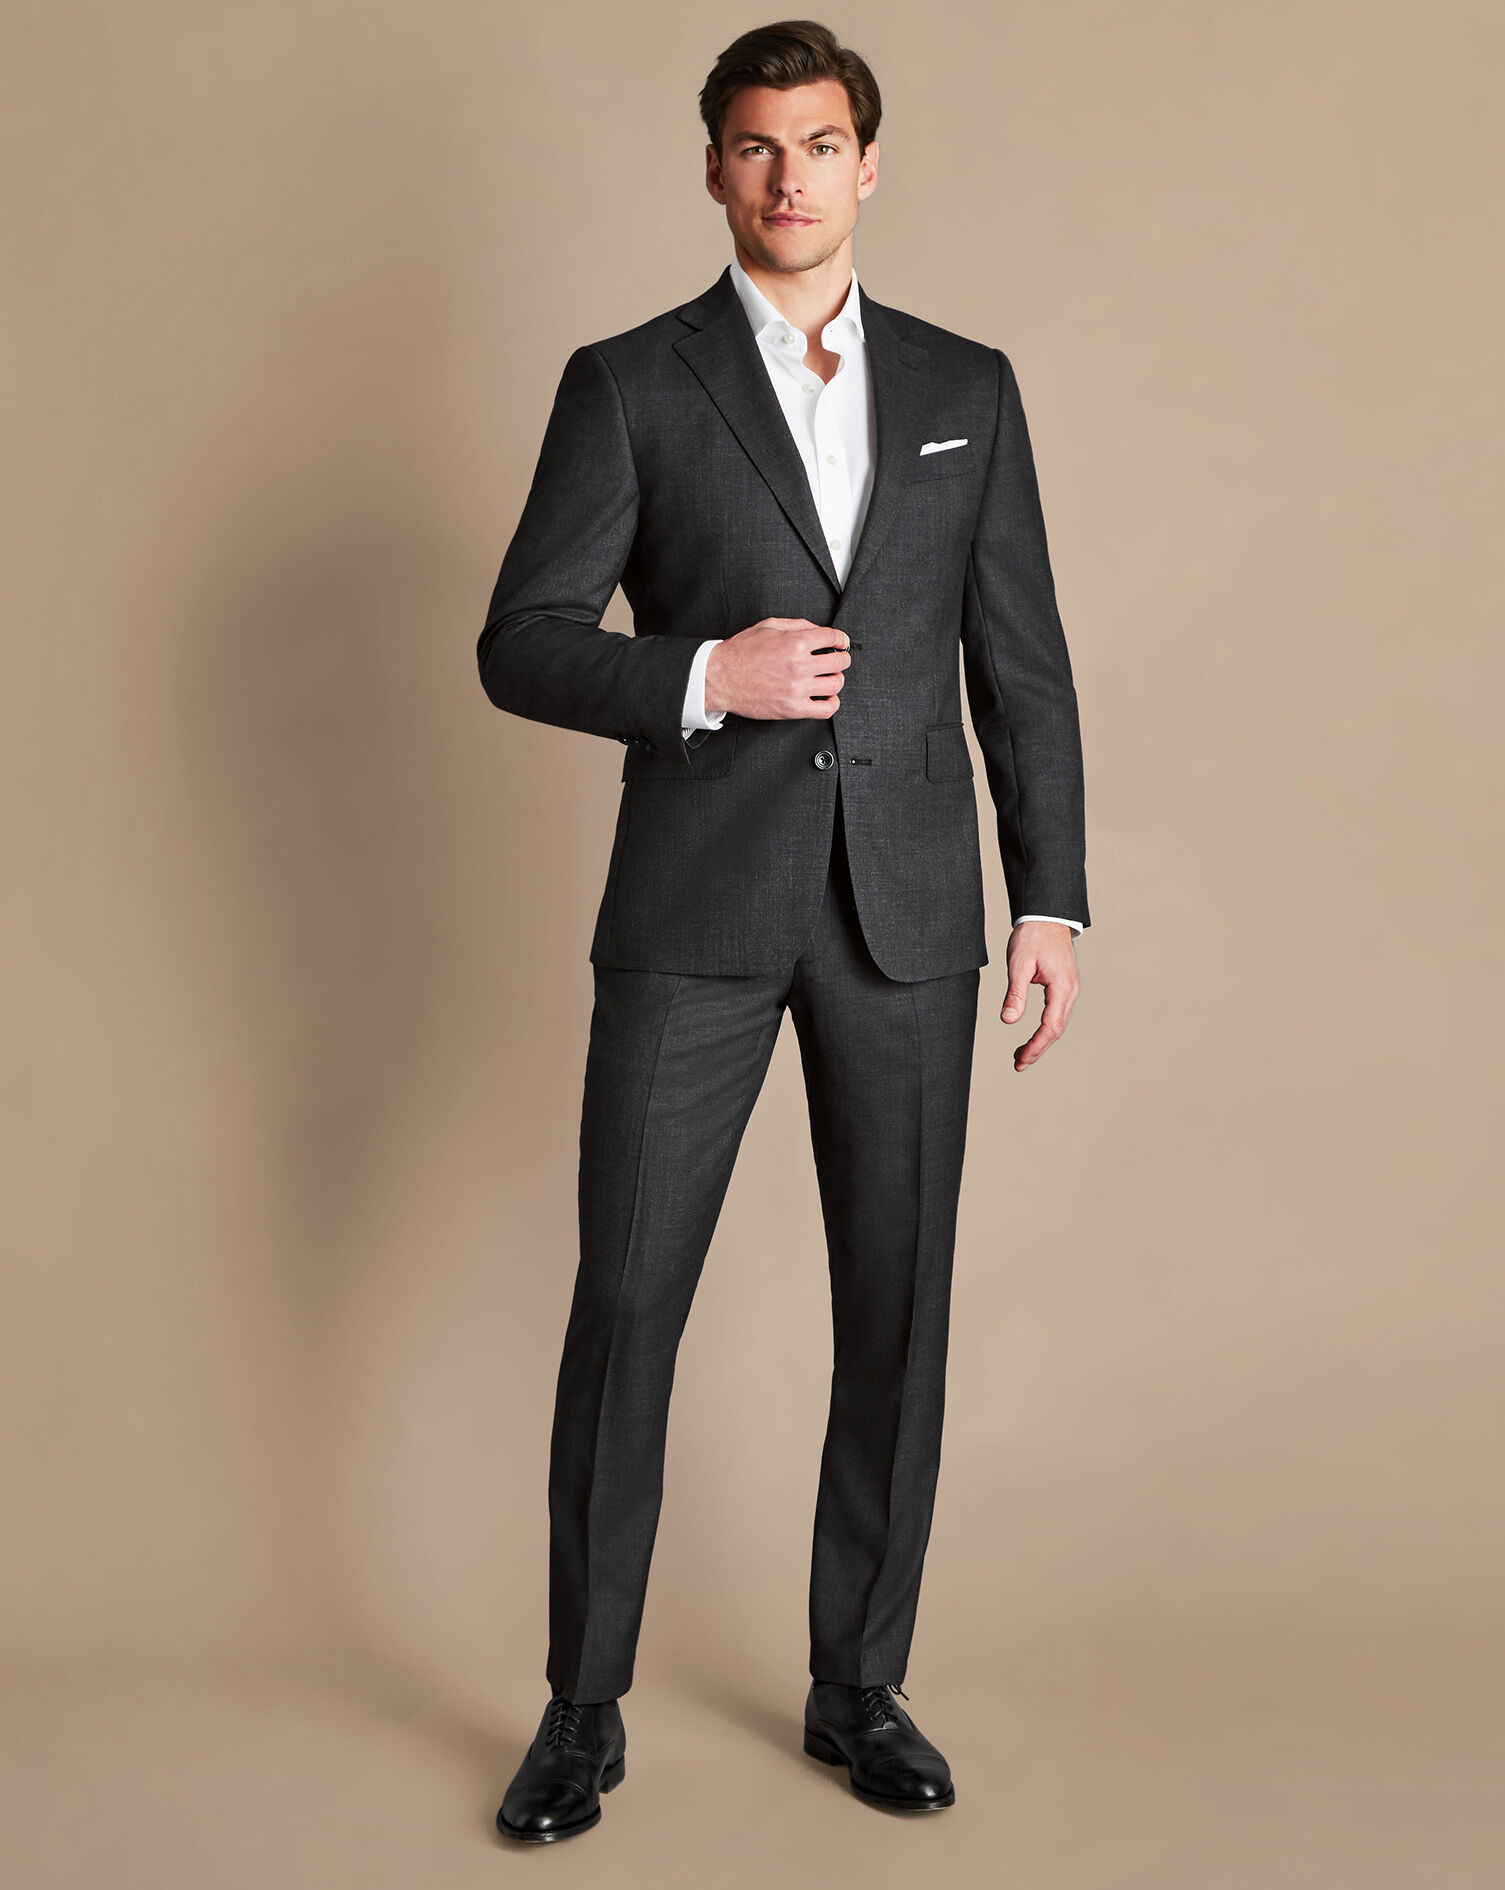 Articles of Style | Articles of Style Signature 4-Season Worsted Suit